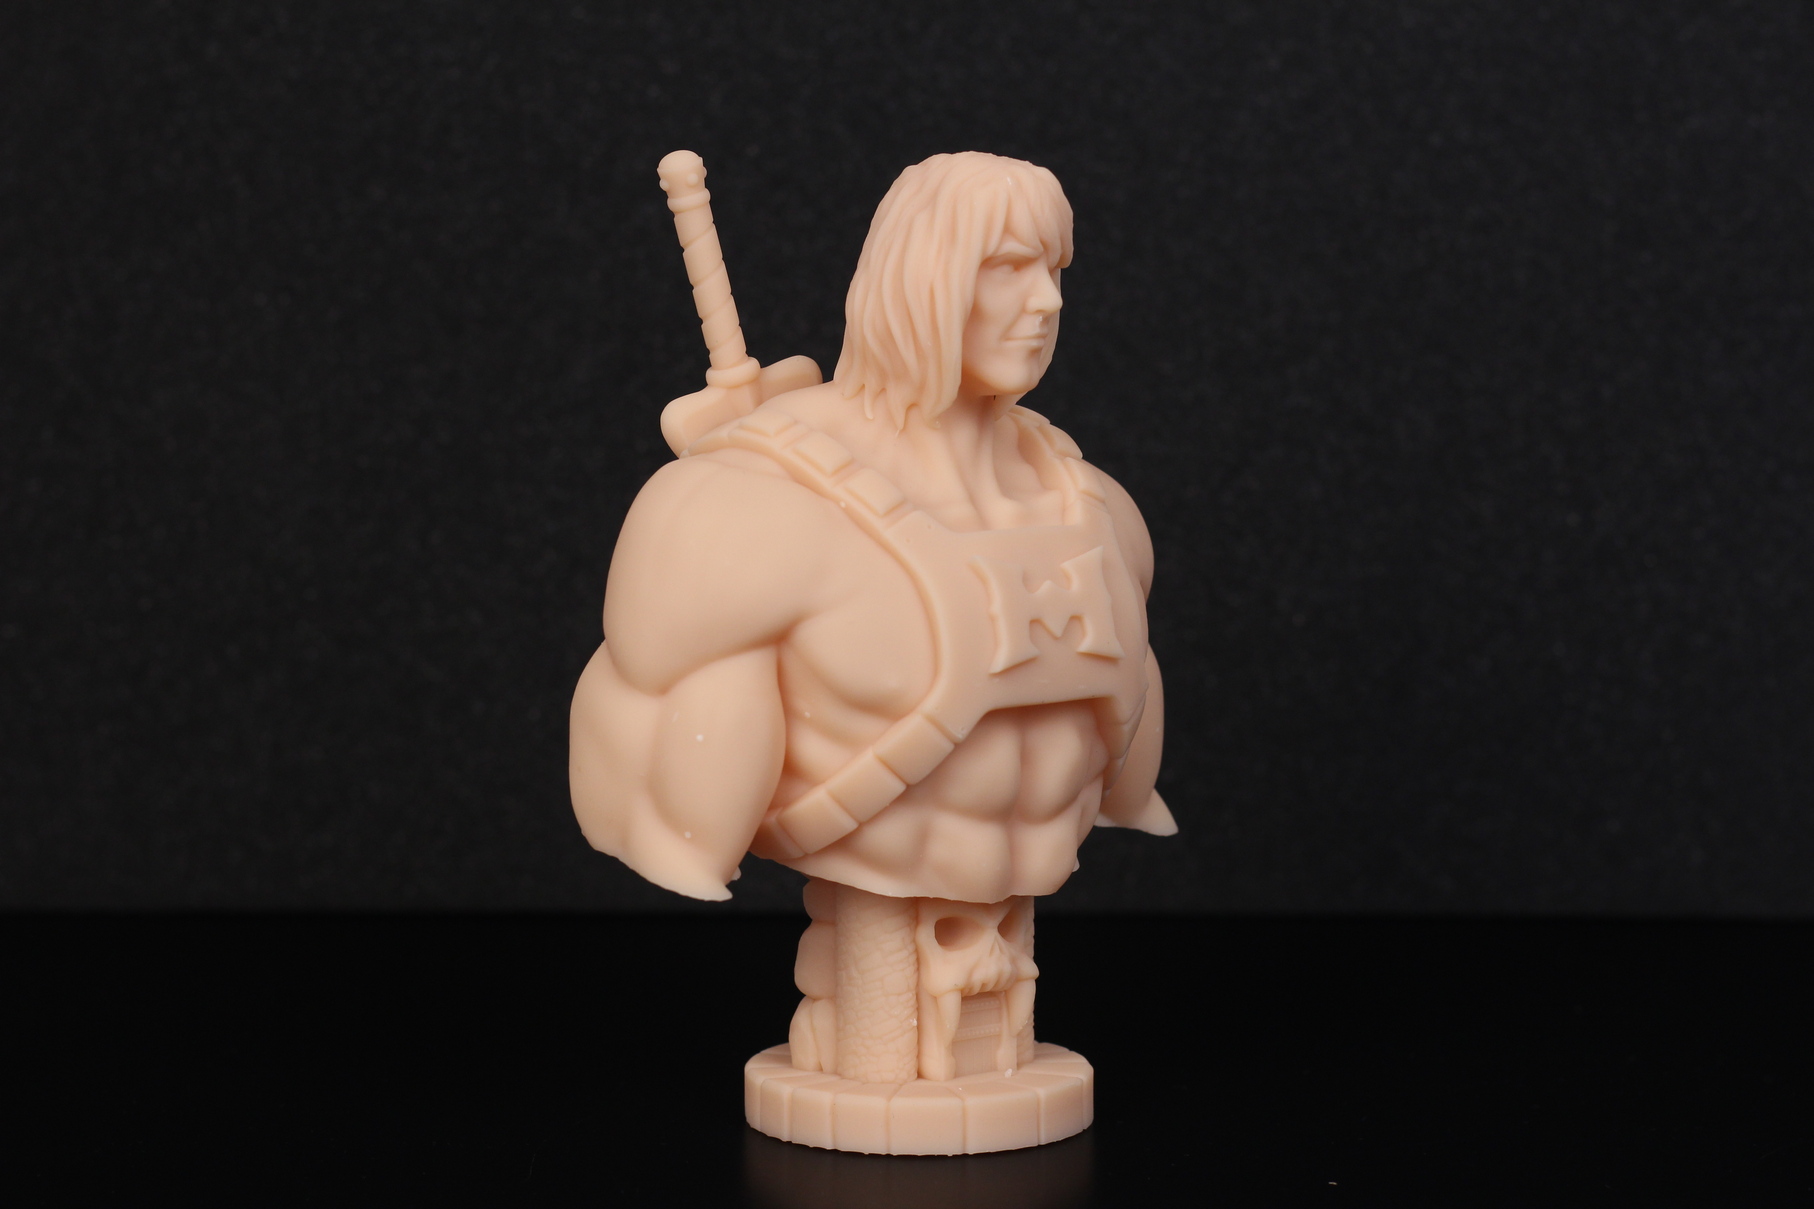 He Man Bust Halot Sky Review 5 | Creality HALOT SKY Review: Worthy of the Premium Price?